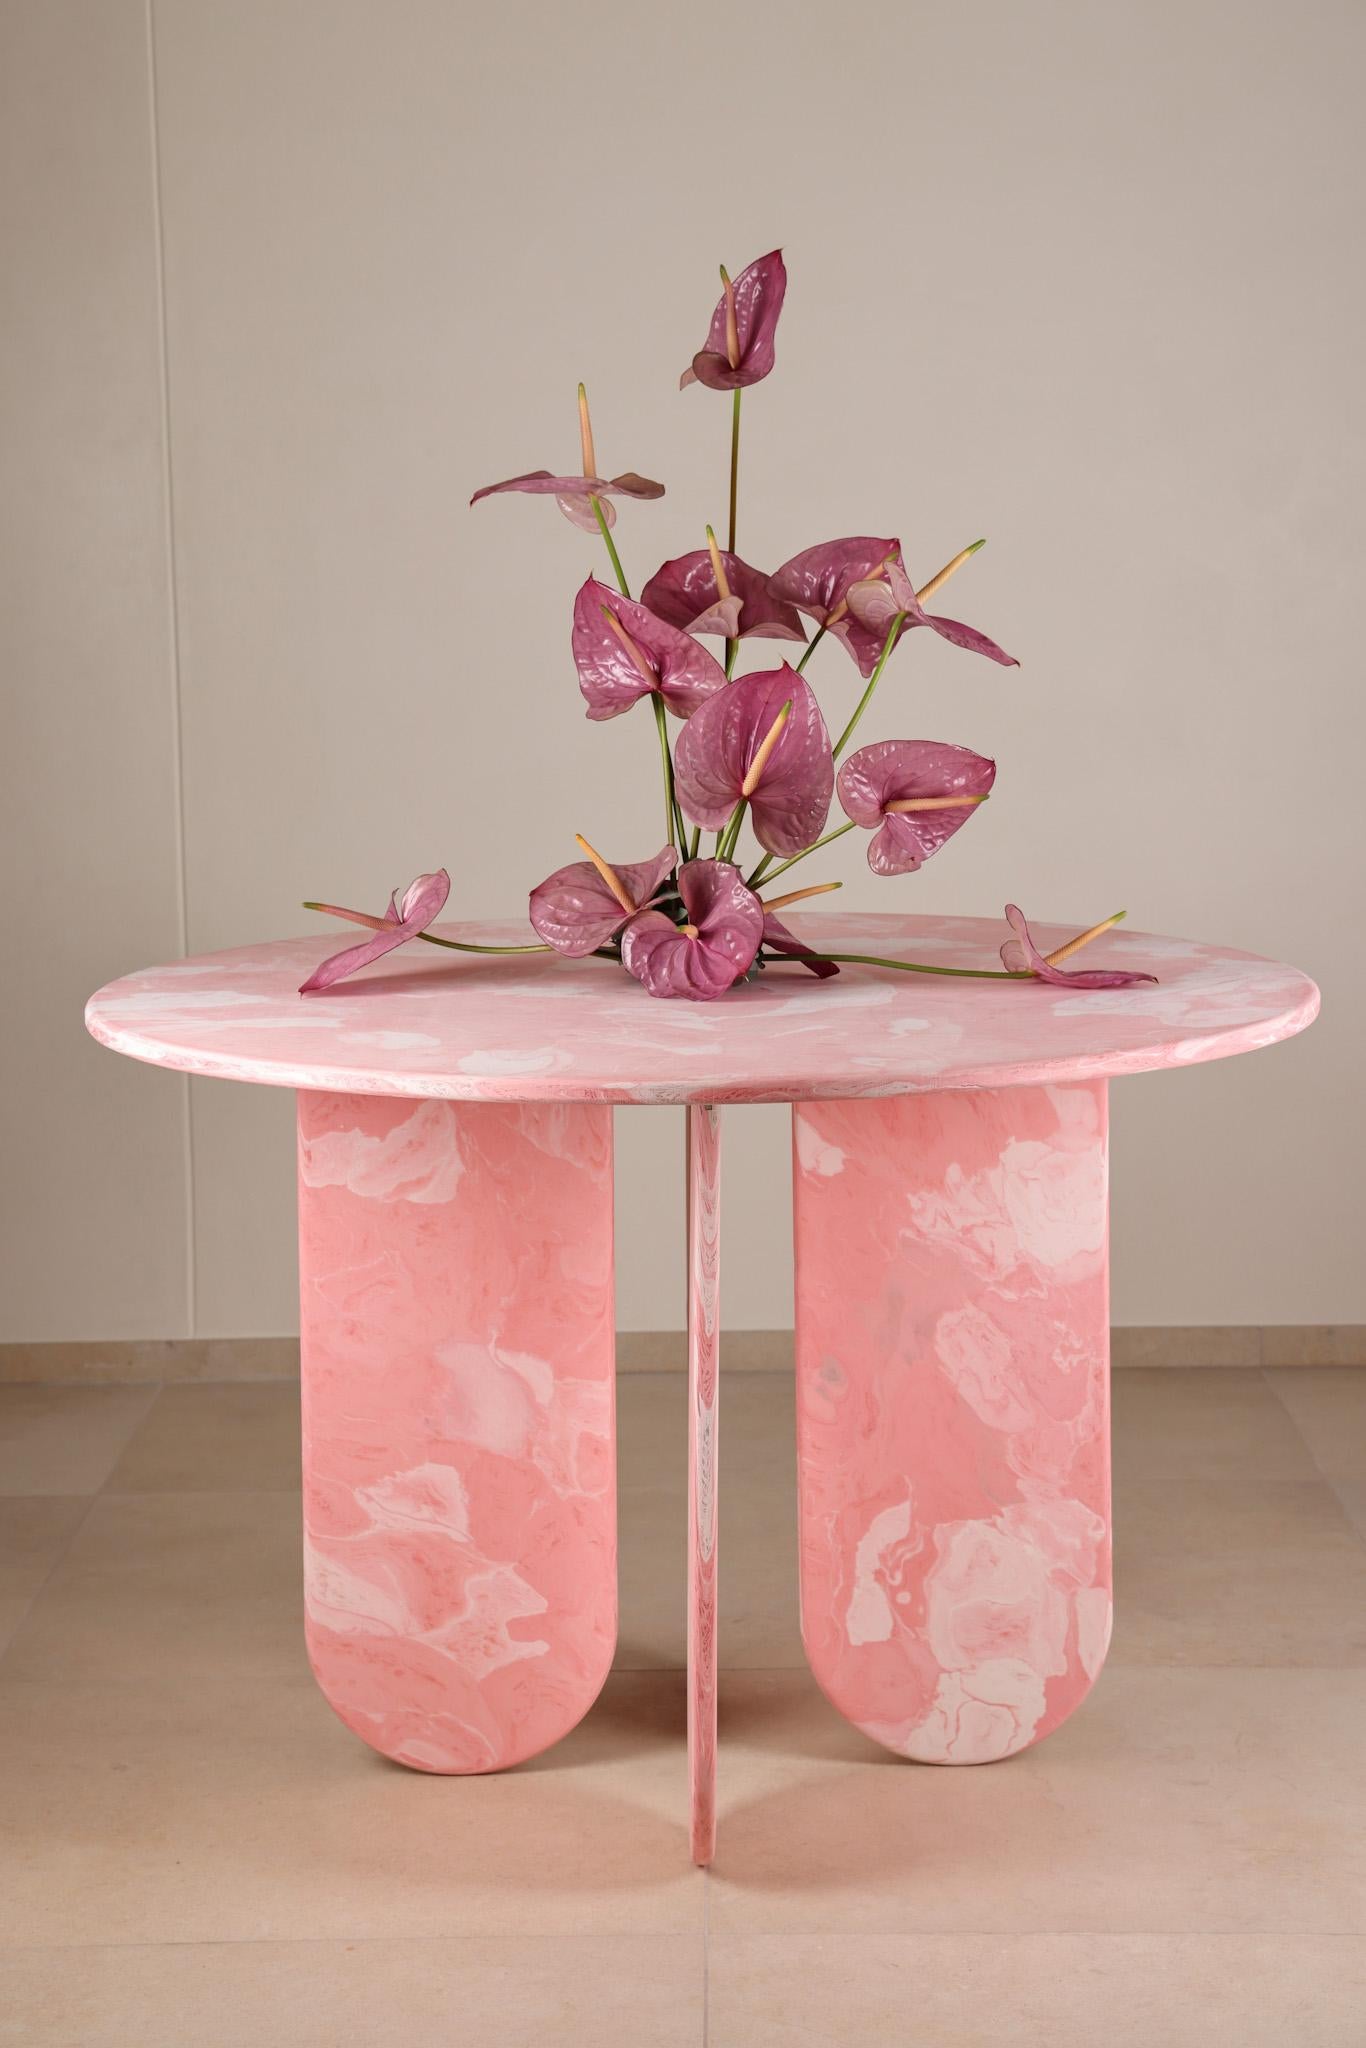 Contemporary Pink Round Table Hand-Crafted 100% Recycled Plastic by Anqa Studios.
Incredible conversations happen around incredible tables. ANQA Studios round table is a geometrically shaped table with a design inspired by the brutalist architecture